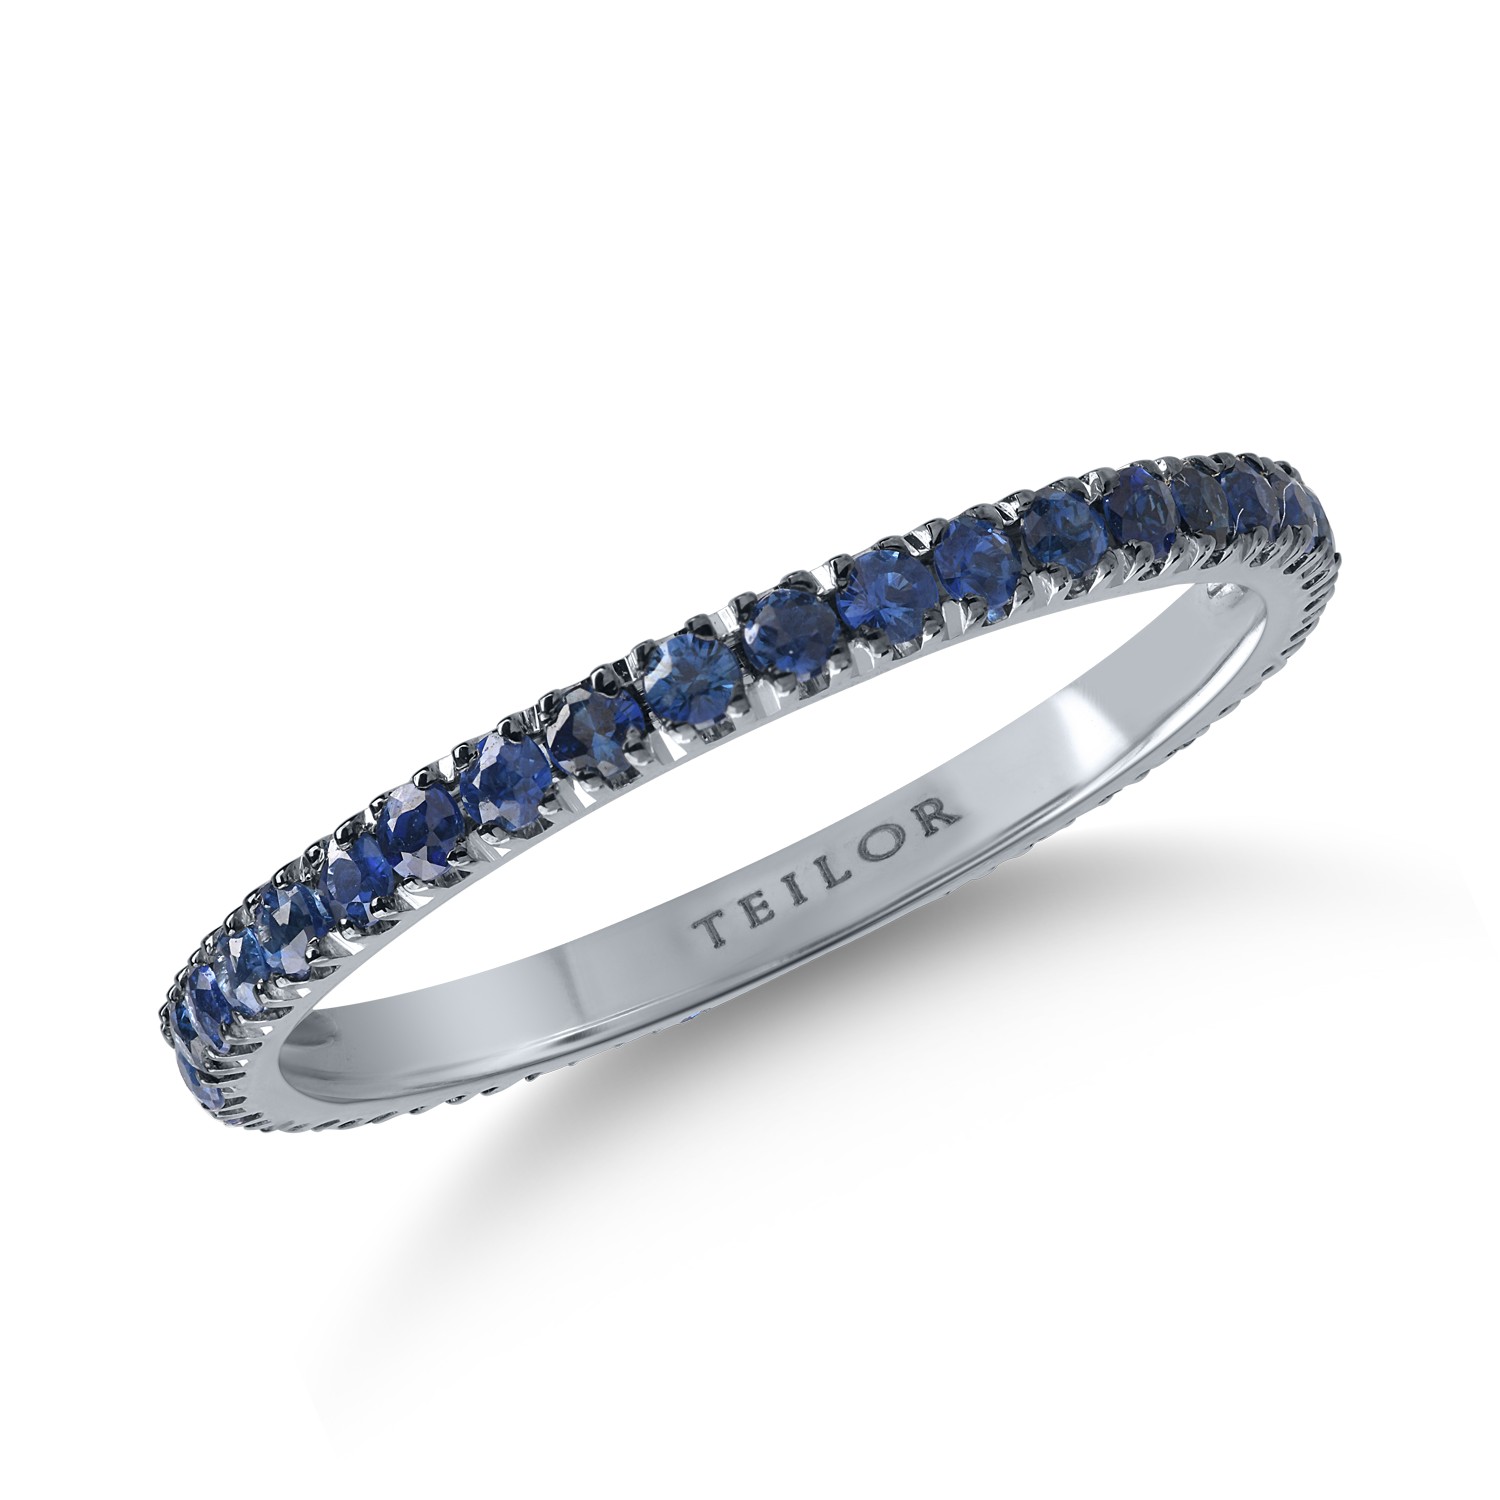 Eternity ring in white gold with 0.7ct sapphires